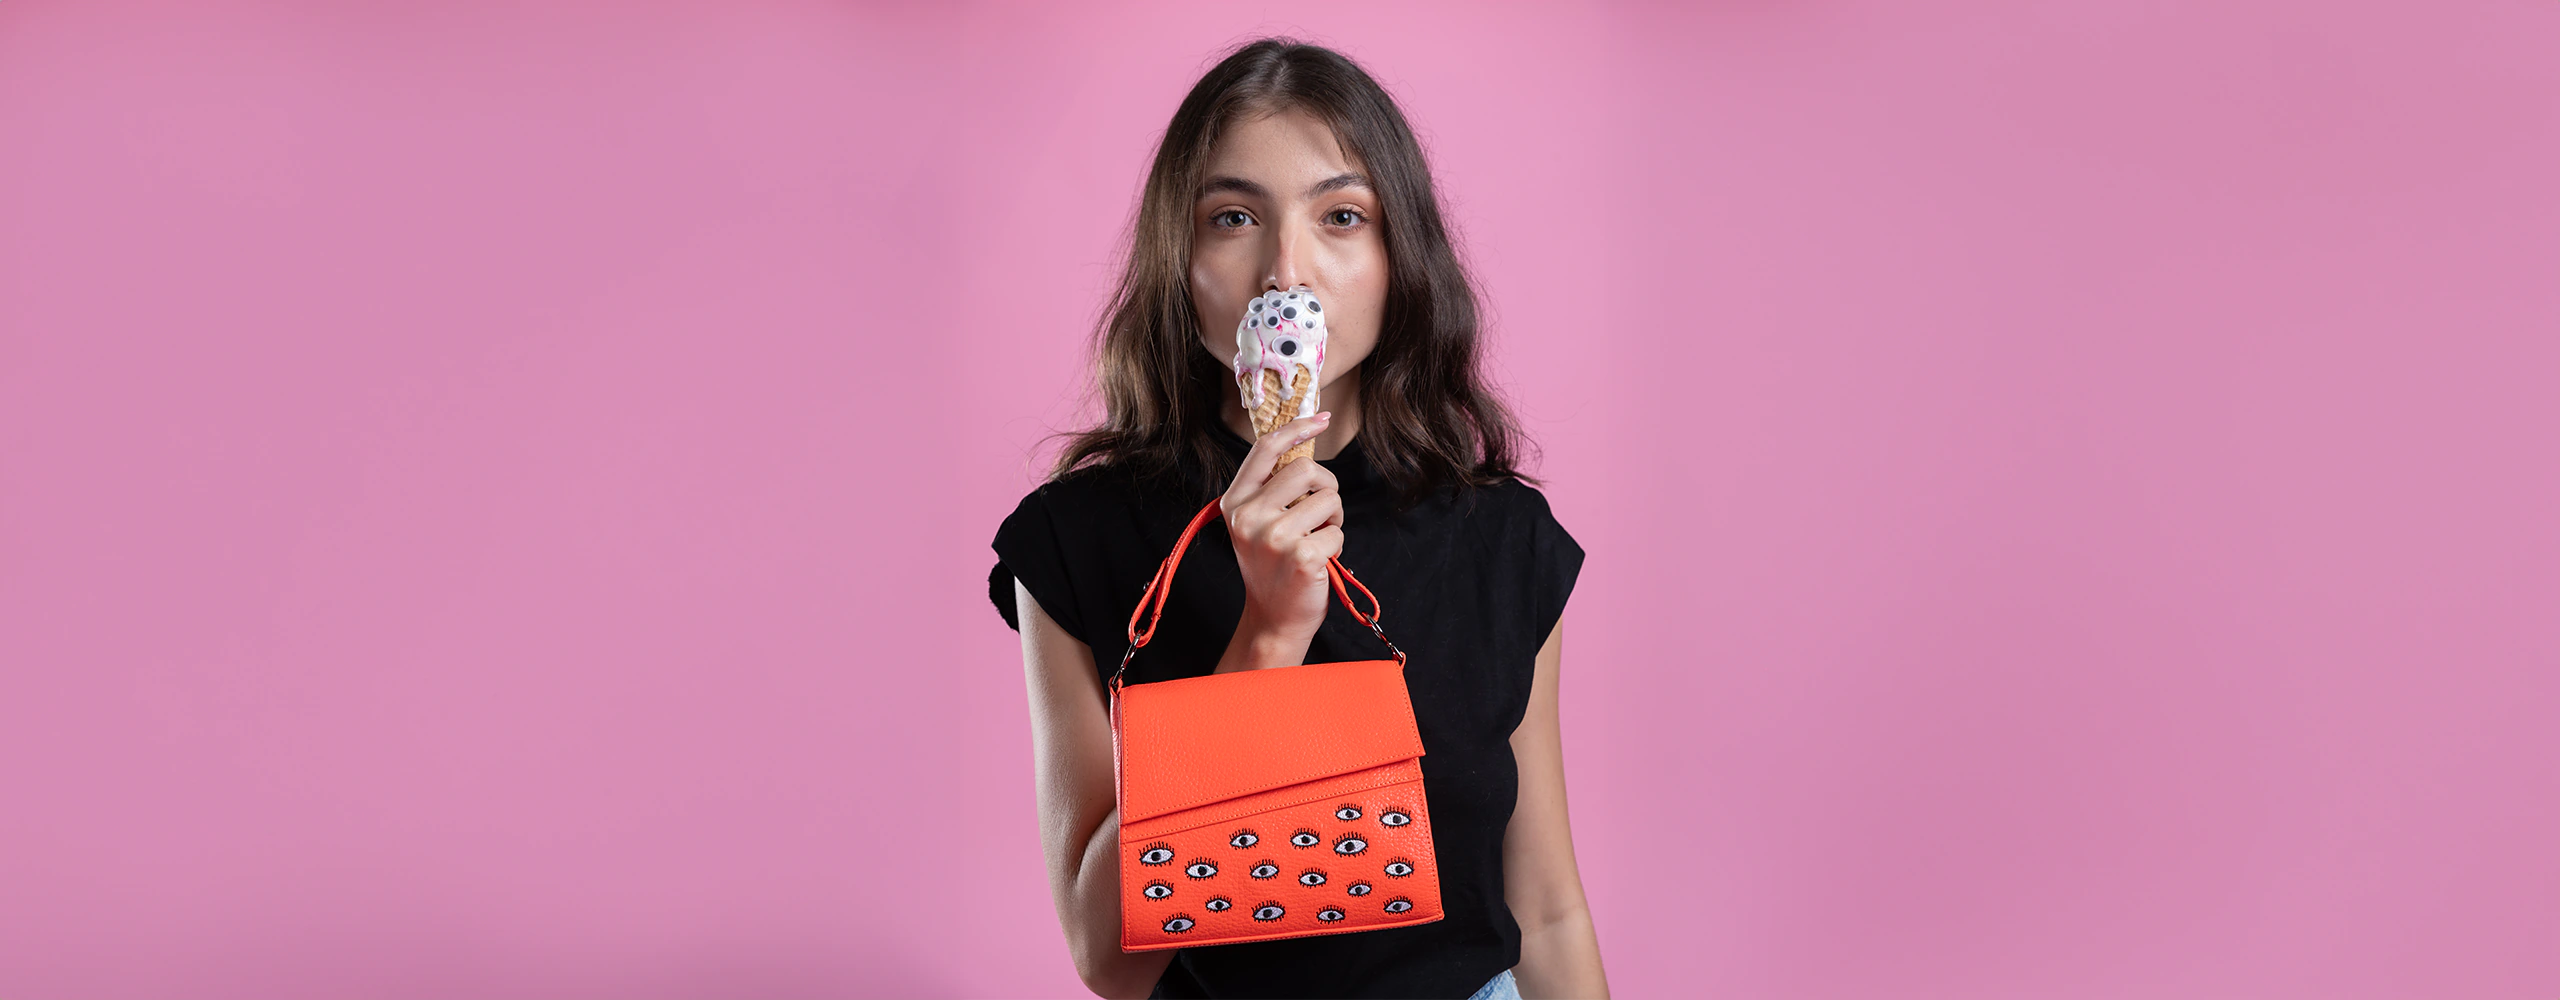 A young woman with light skin and long brown hair is holding an ice cream cone with googly eyes against a pink background. She is wearing a black top and holding an "Anastasio Crossbody Handbag" by Min & Mon, an NYC-based brand. The handbag is bright orange with a pattern of eye designs. The woman is looking directly at the camera while enjoying her ice cream.